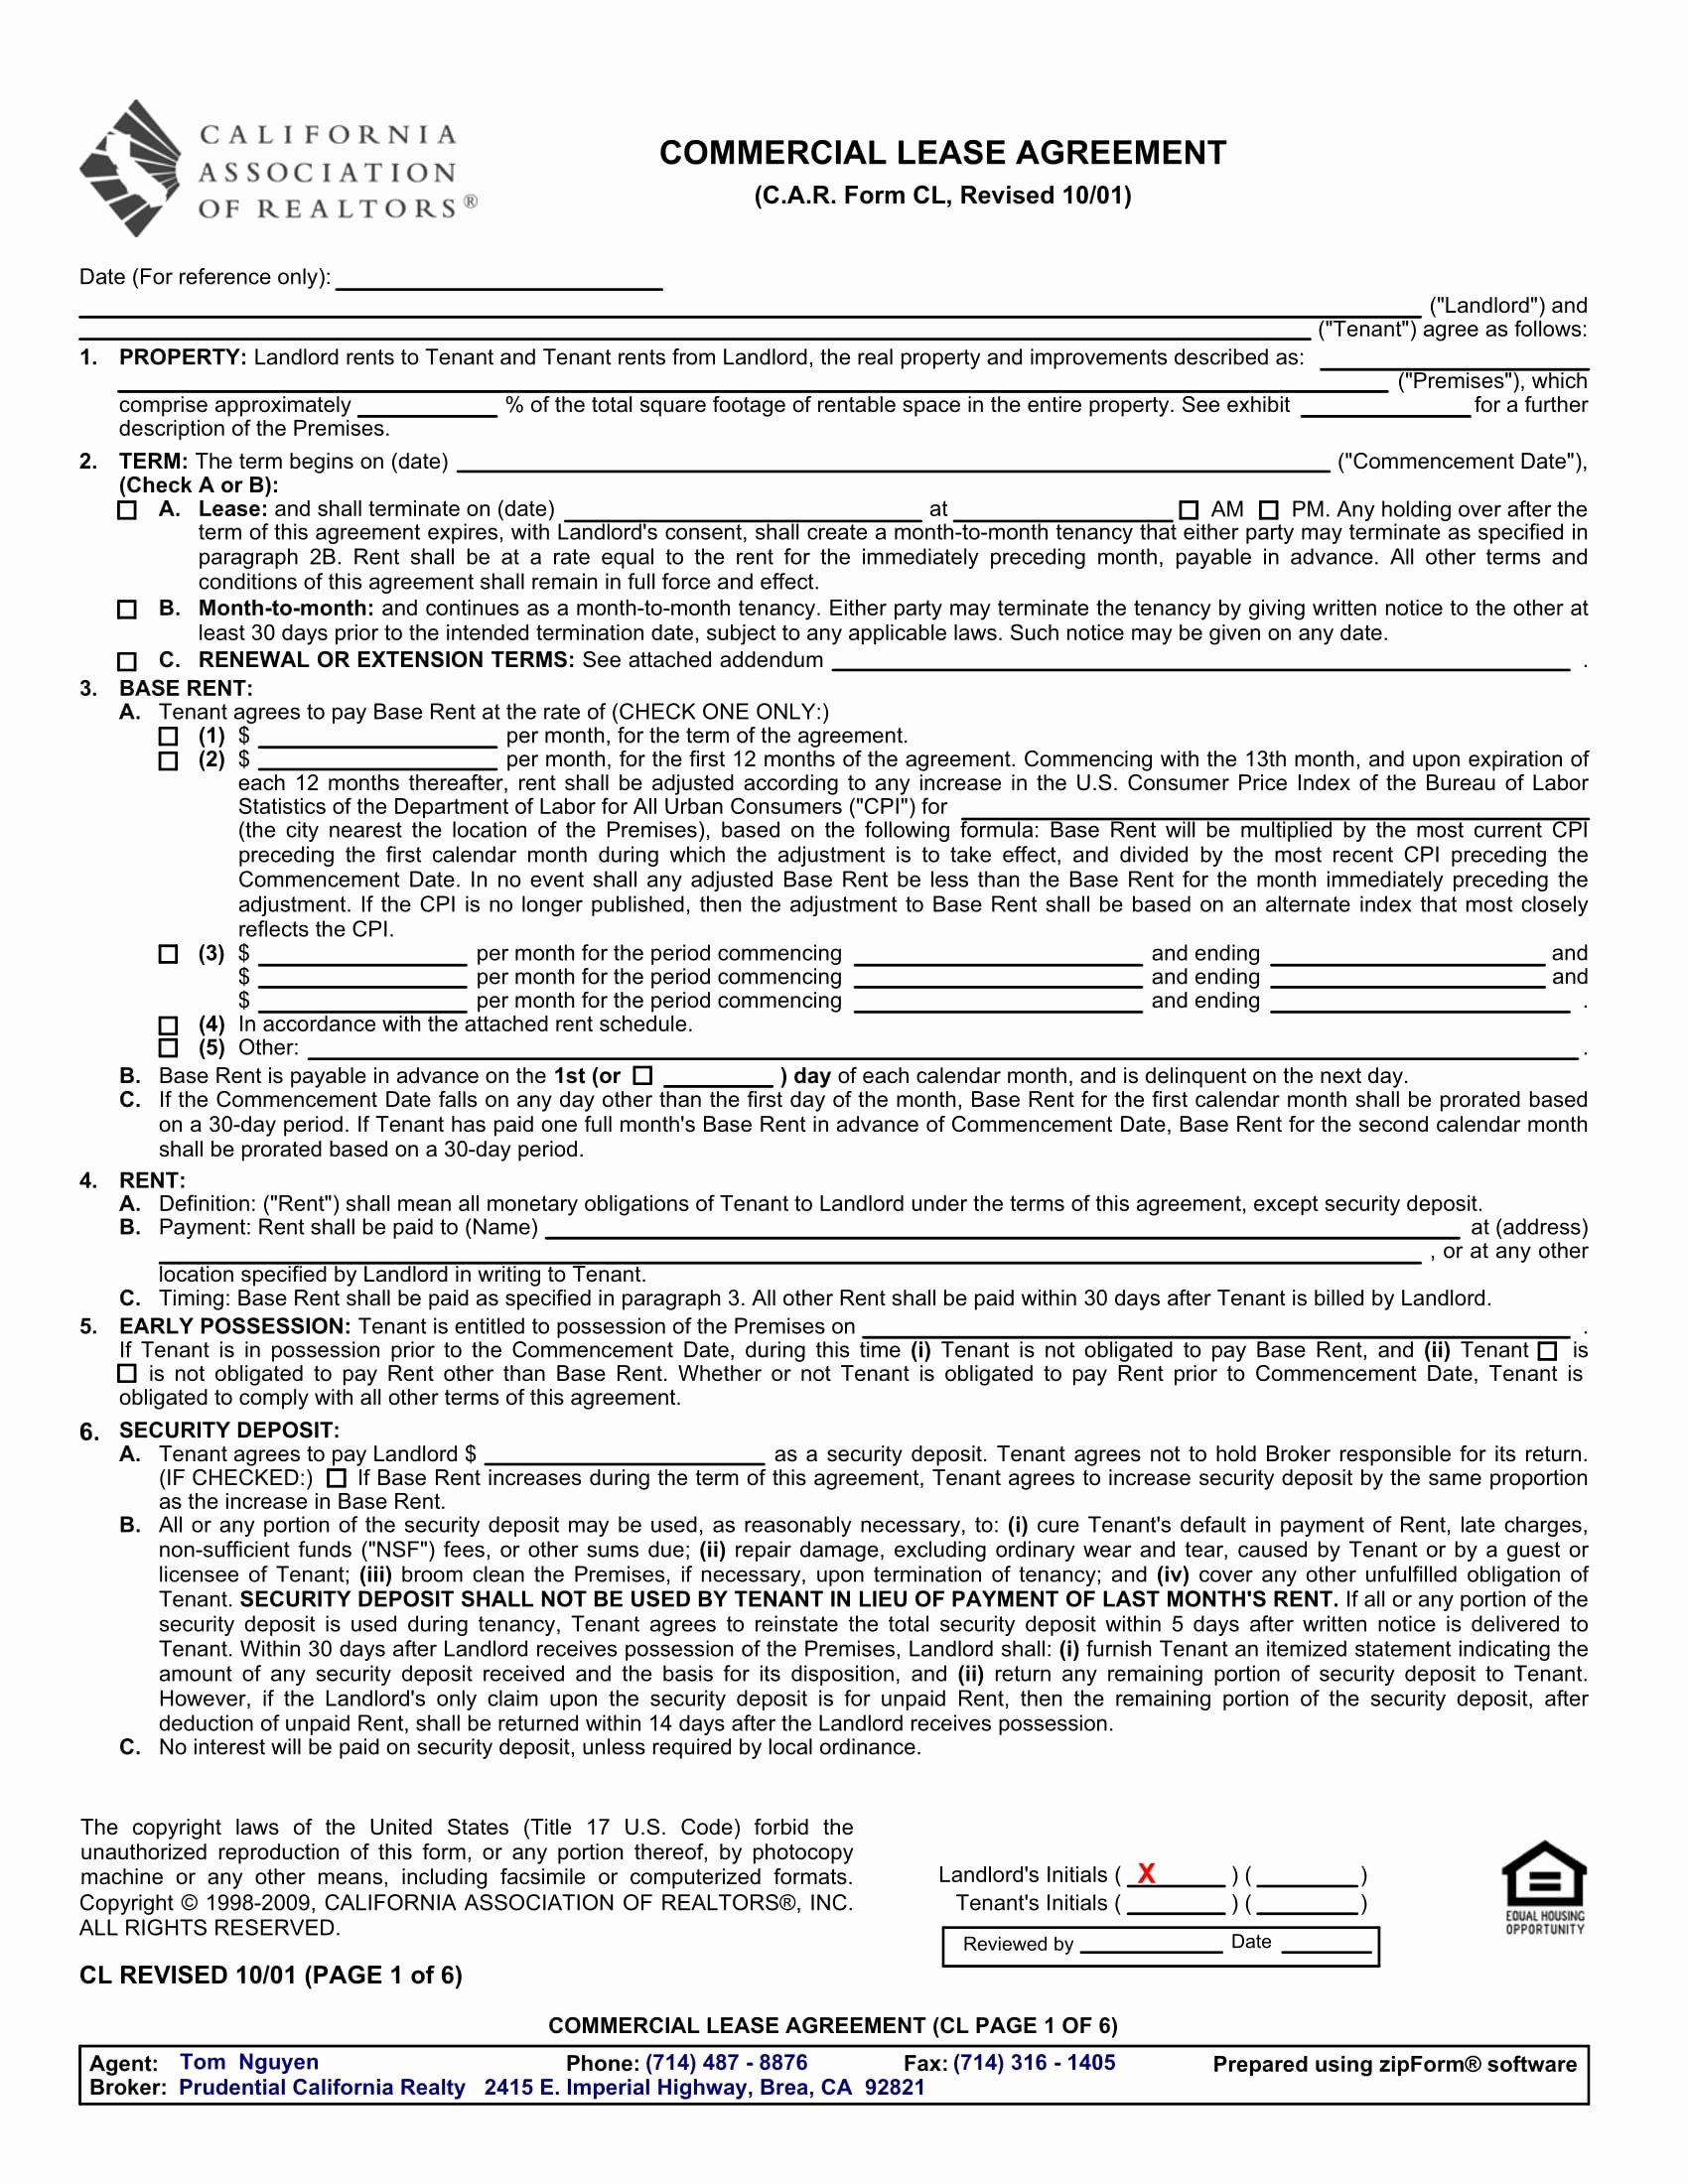 Commercial Lease Agreement Template Free Inspirational 15 Business forms for Car Dealers and Other Vehicle